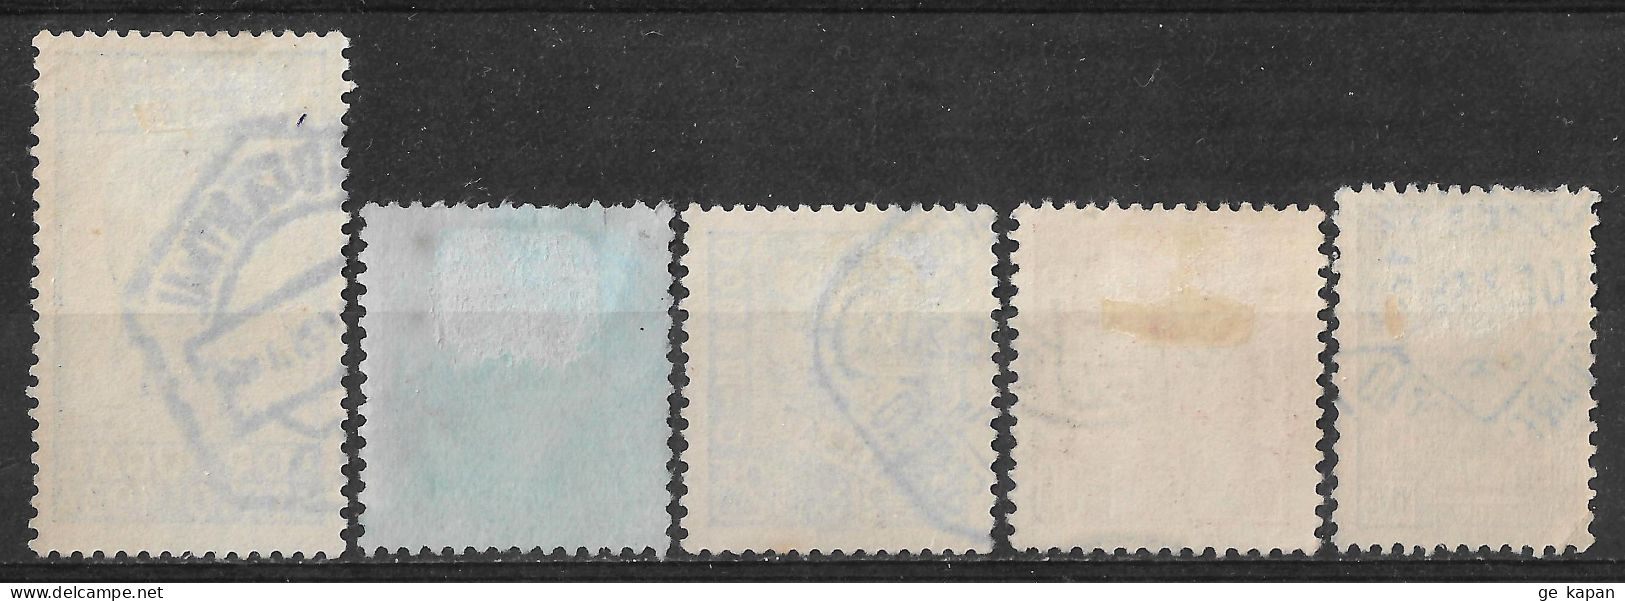 1934-1935 PORTUGAL SET OF 5 USED STAMPS (Michel # 580,585x,586,588,589) CV €22.30 - Used Stamps